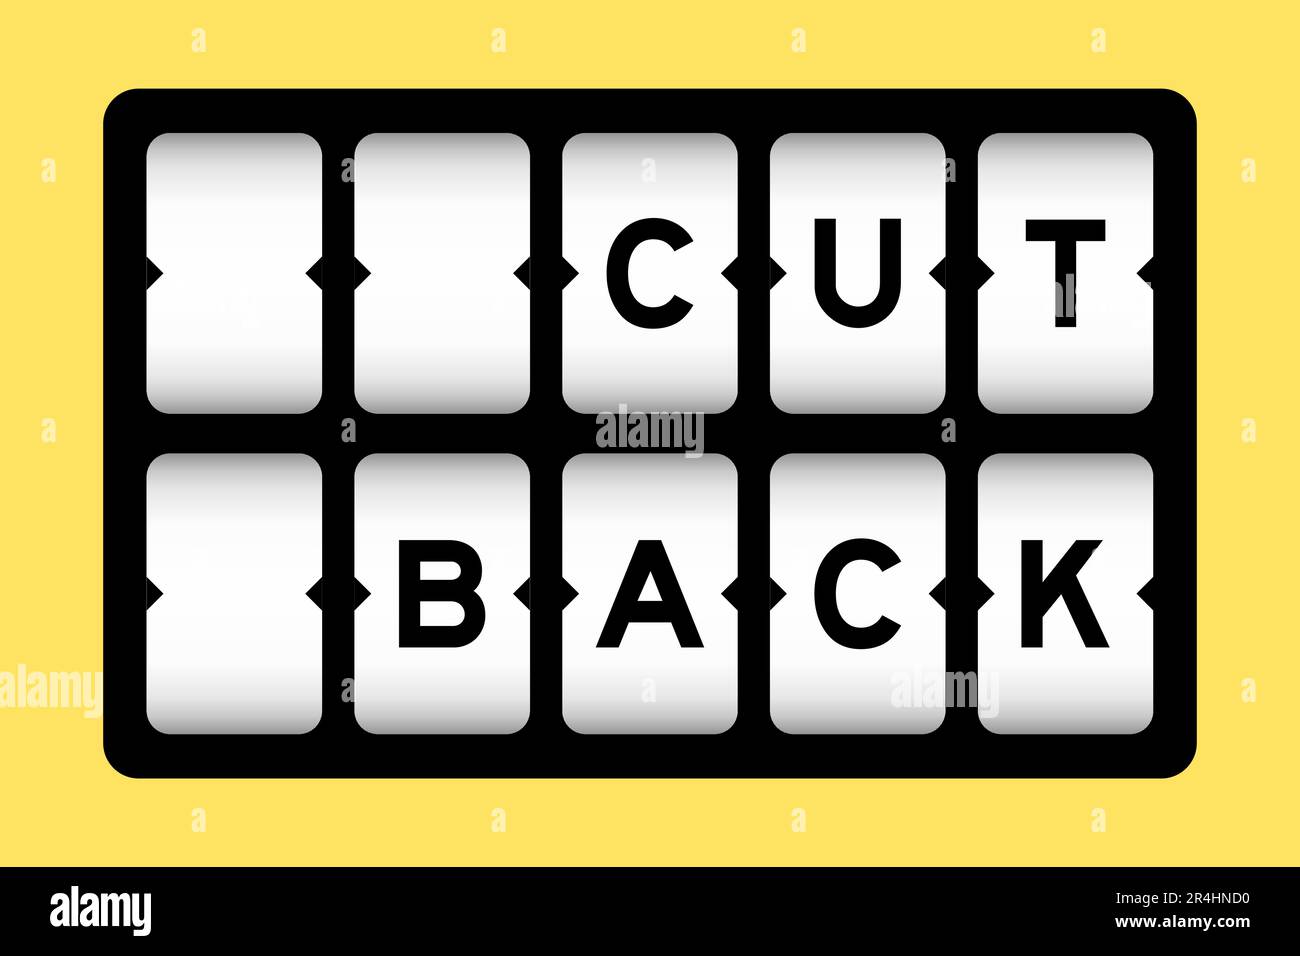 Black color in word cut back on slot banner with yellow color background Stock Vector